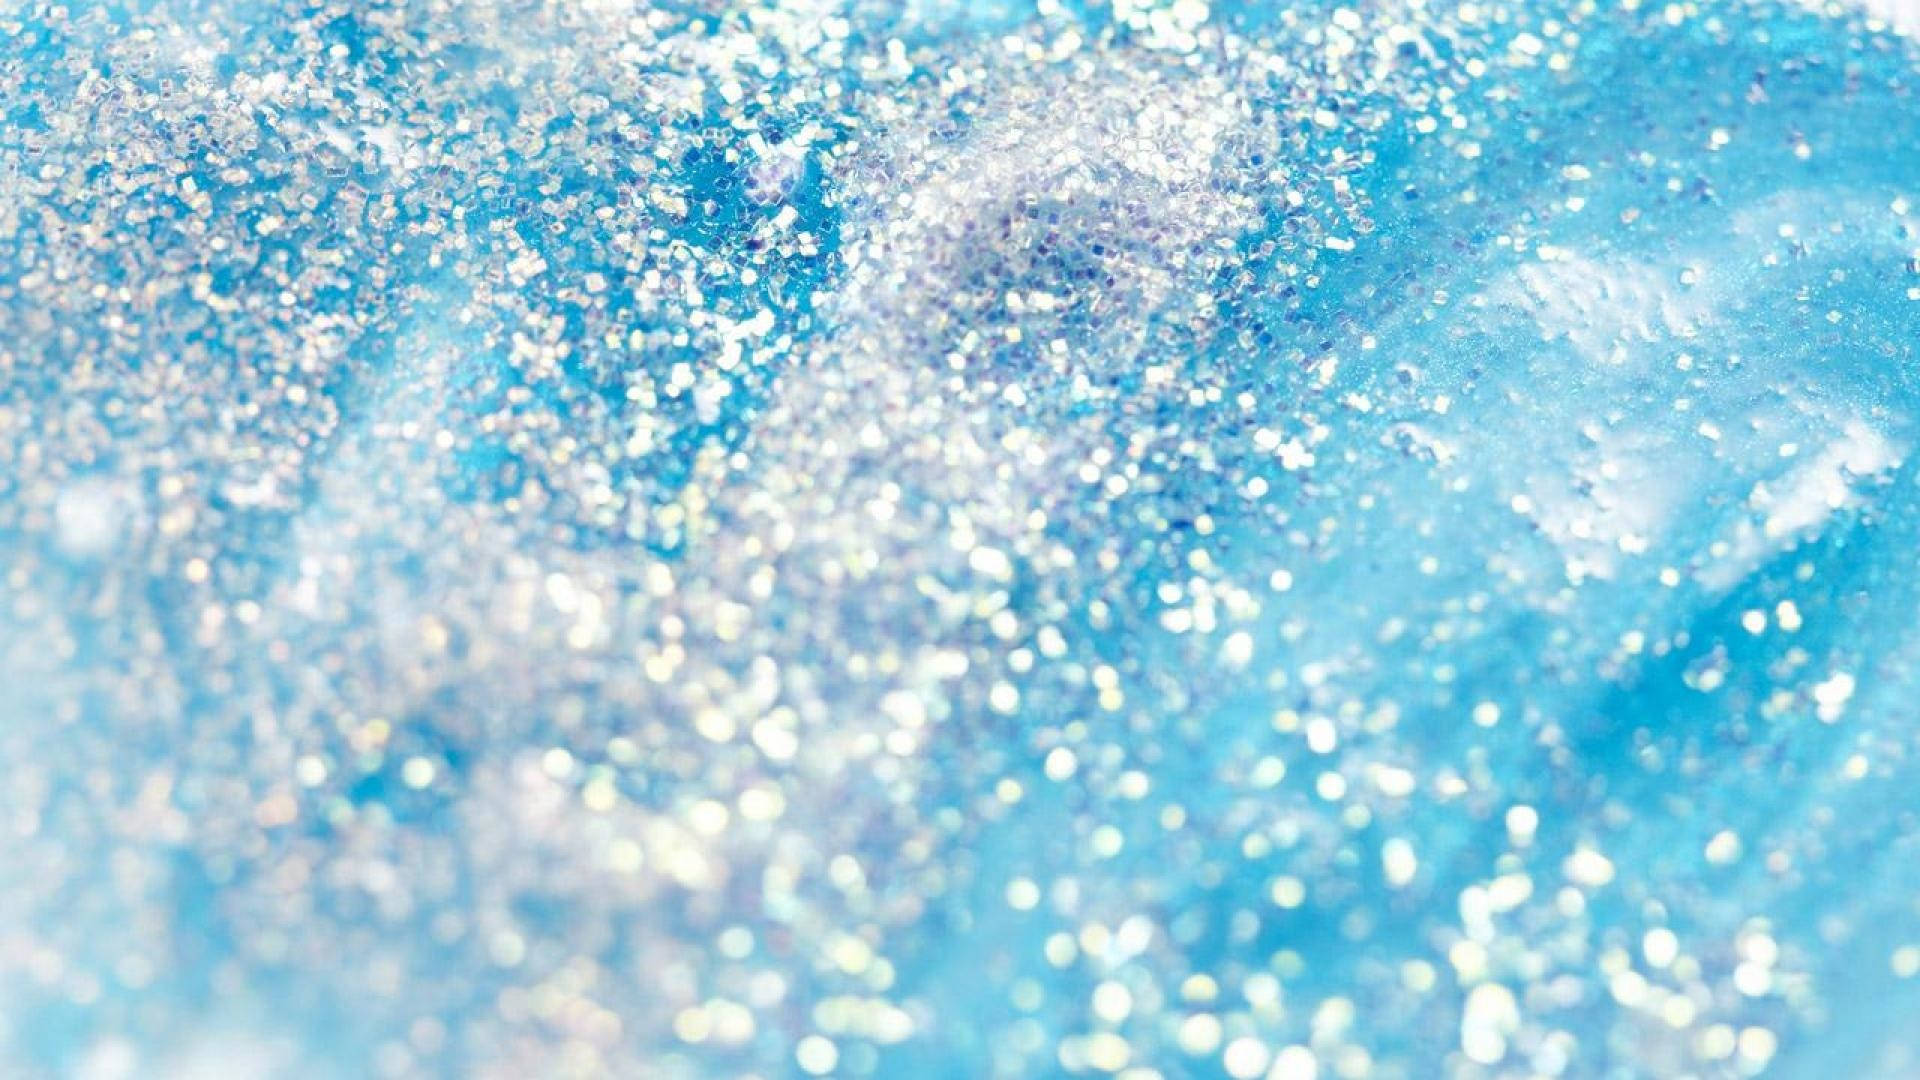 Abstract White And Blue Glitter